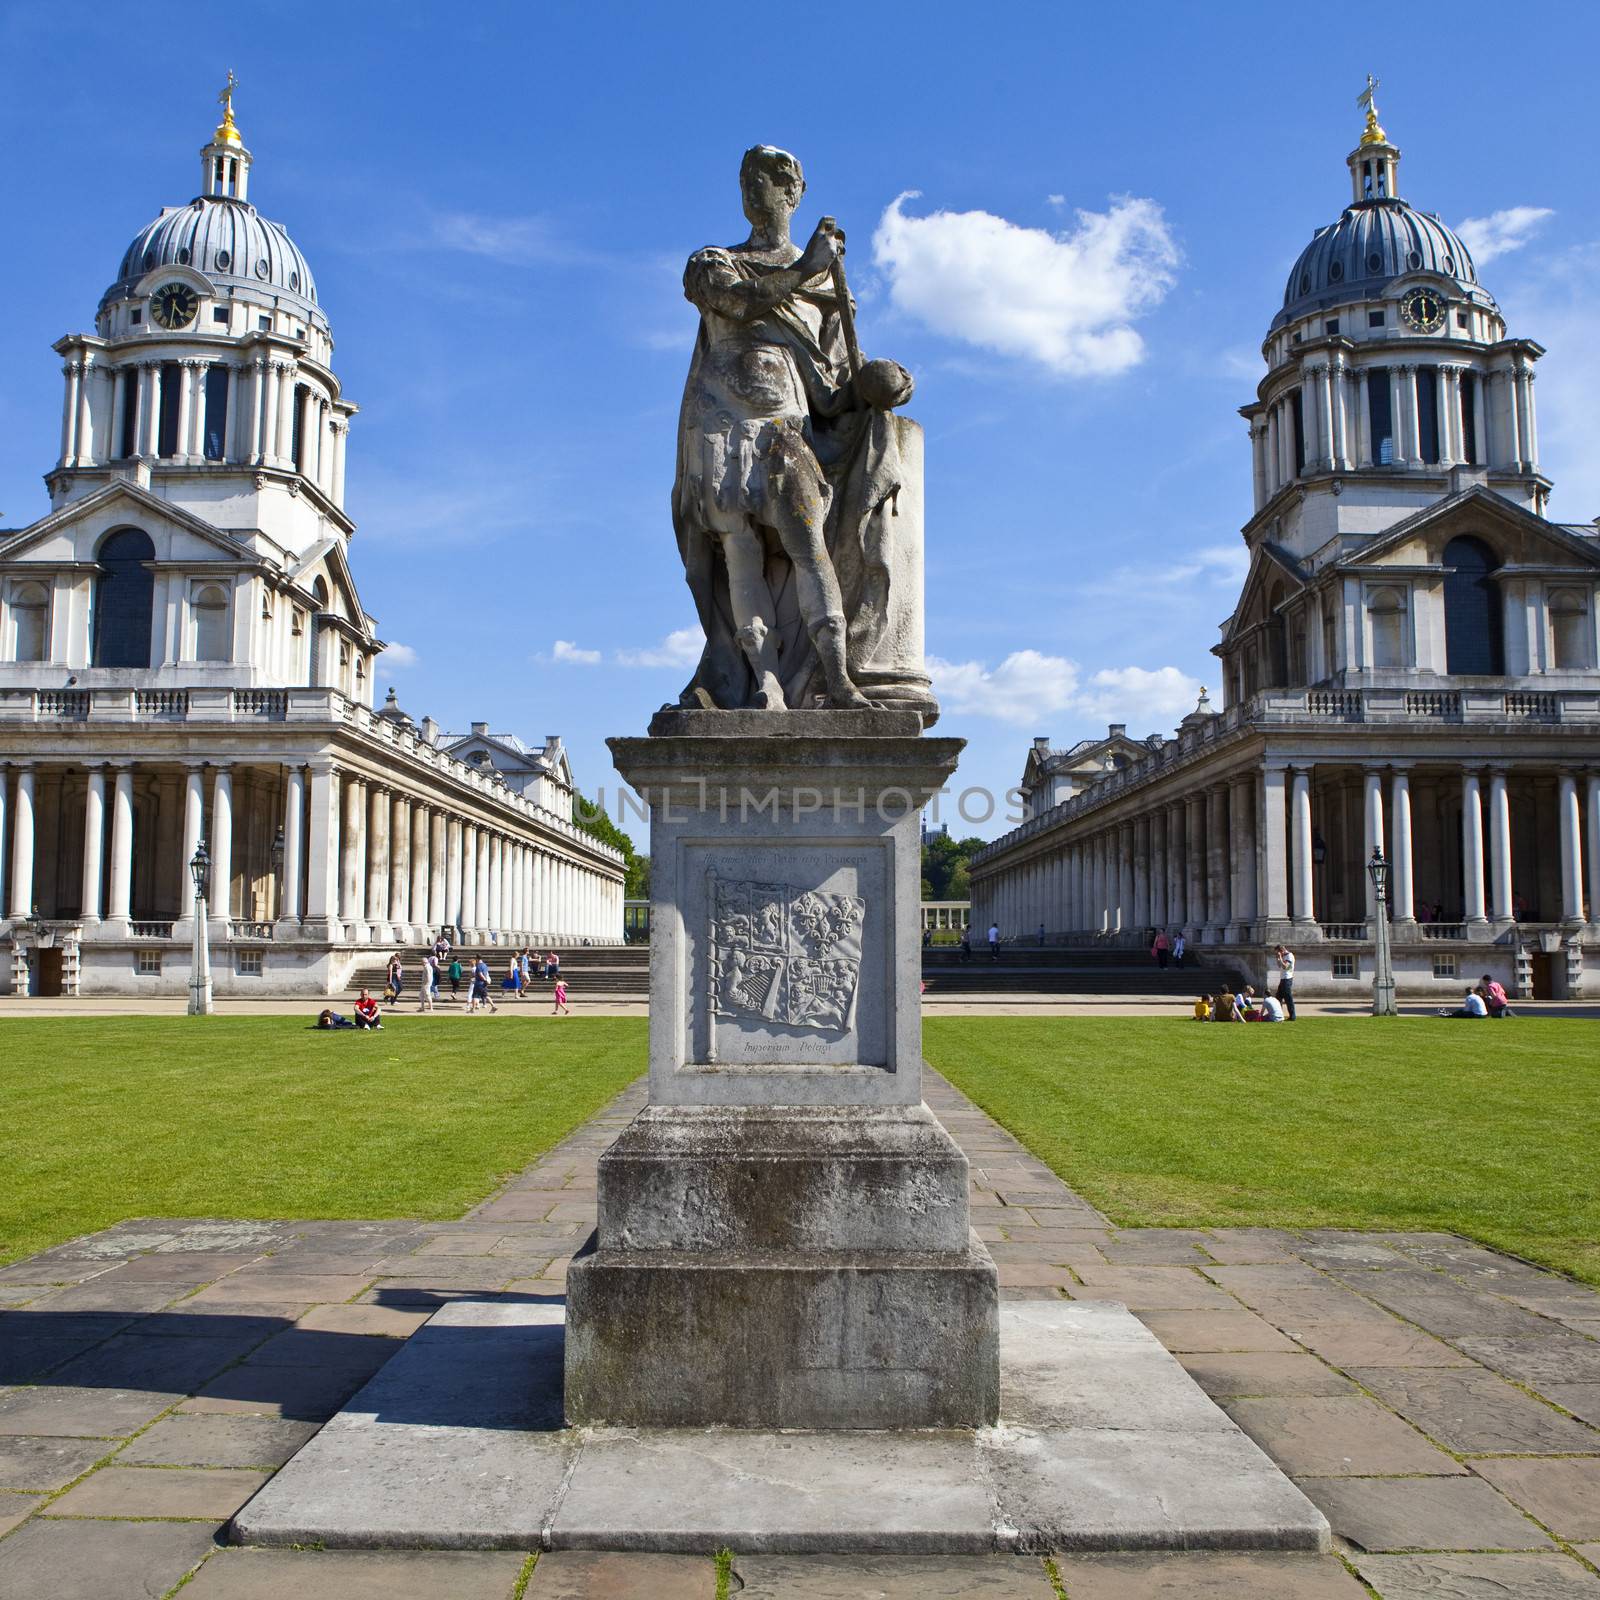 Grand Square at the Royal Naval College in Greenwich by chrisdorney